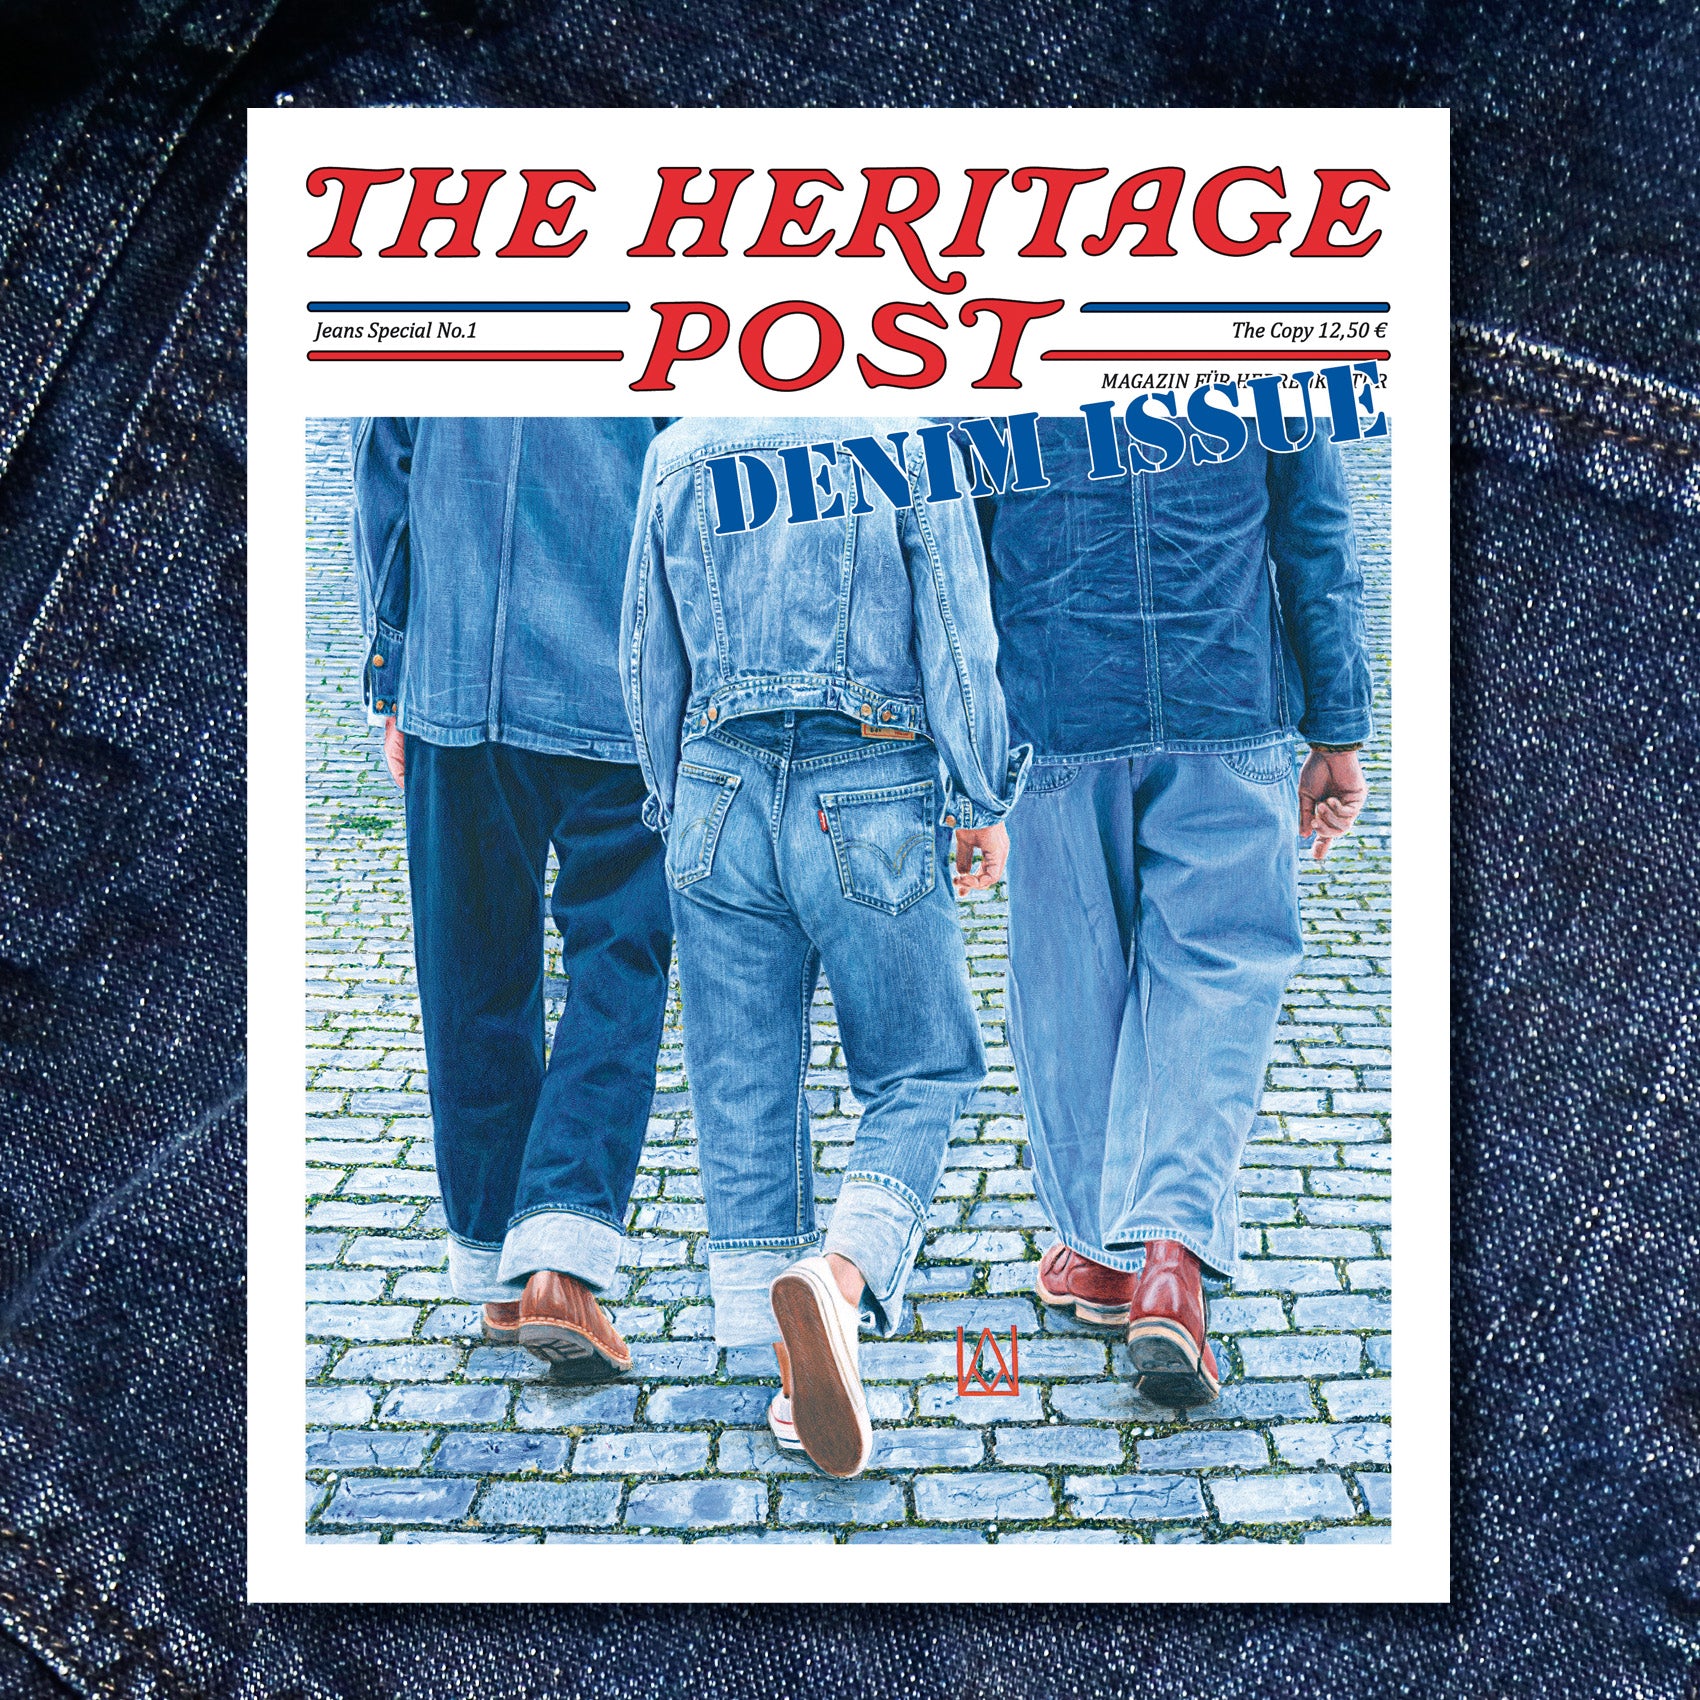 The Heritage Post - Jeans Special No. 1